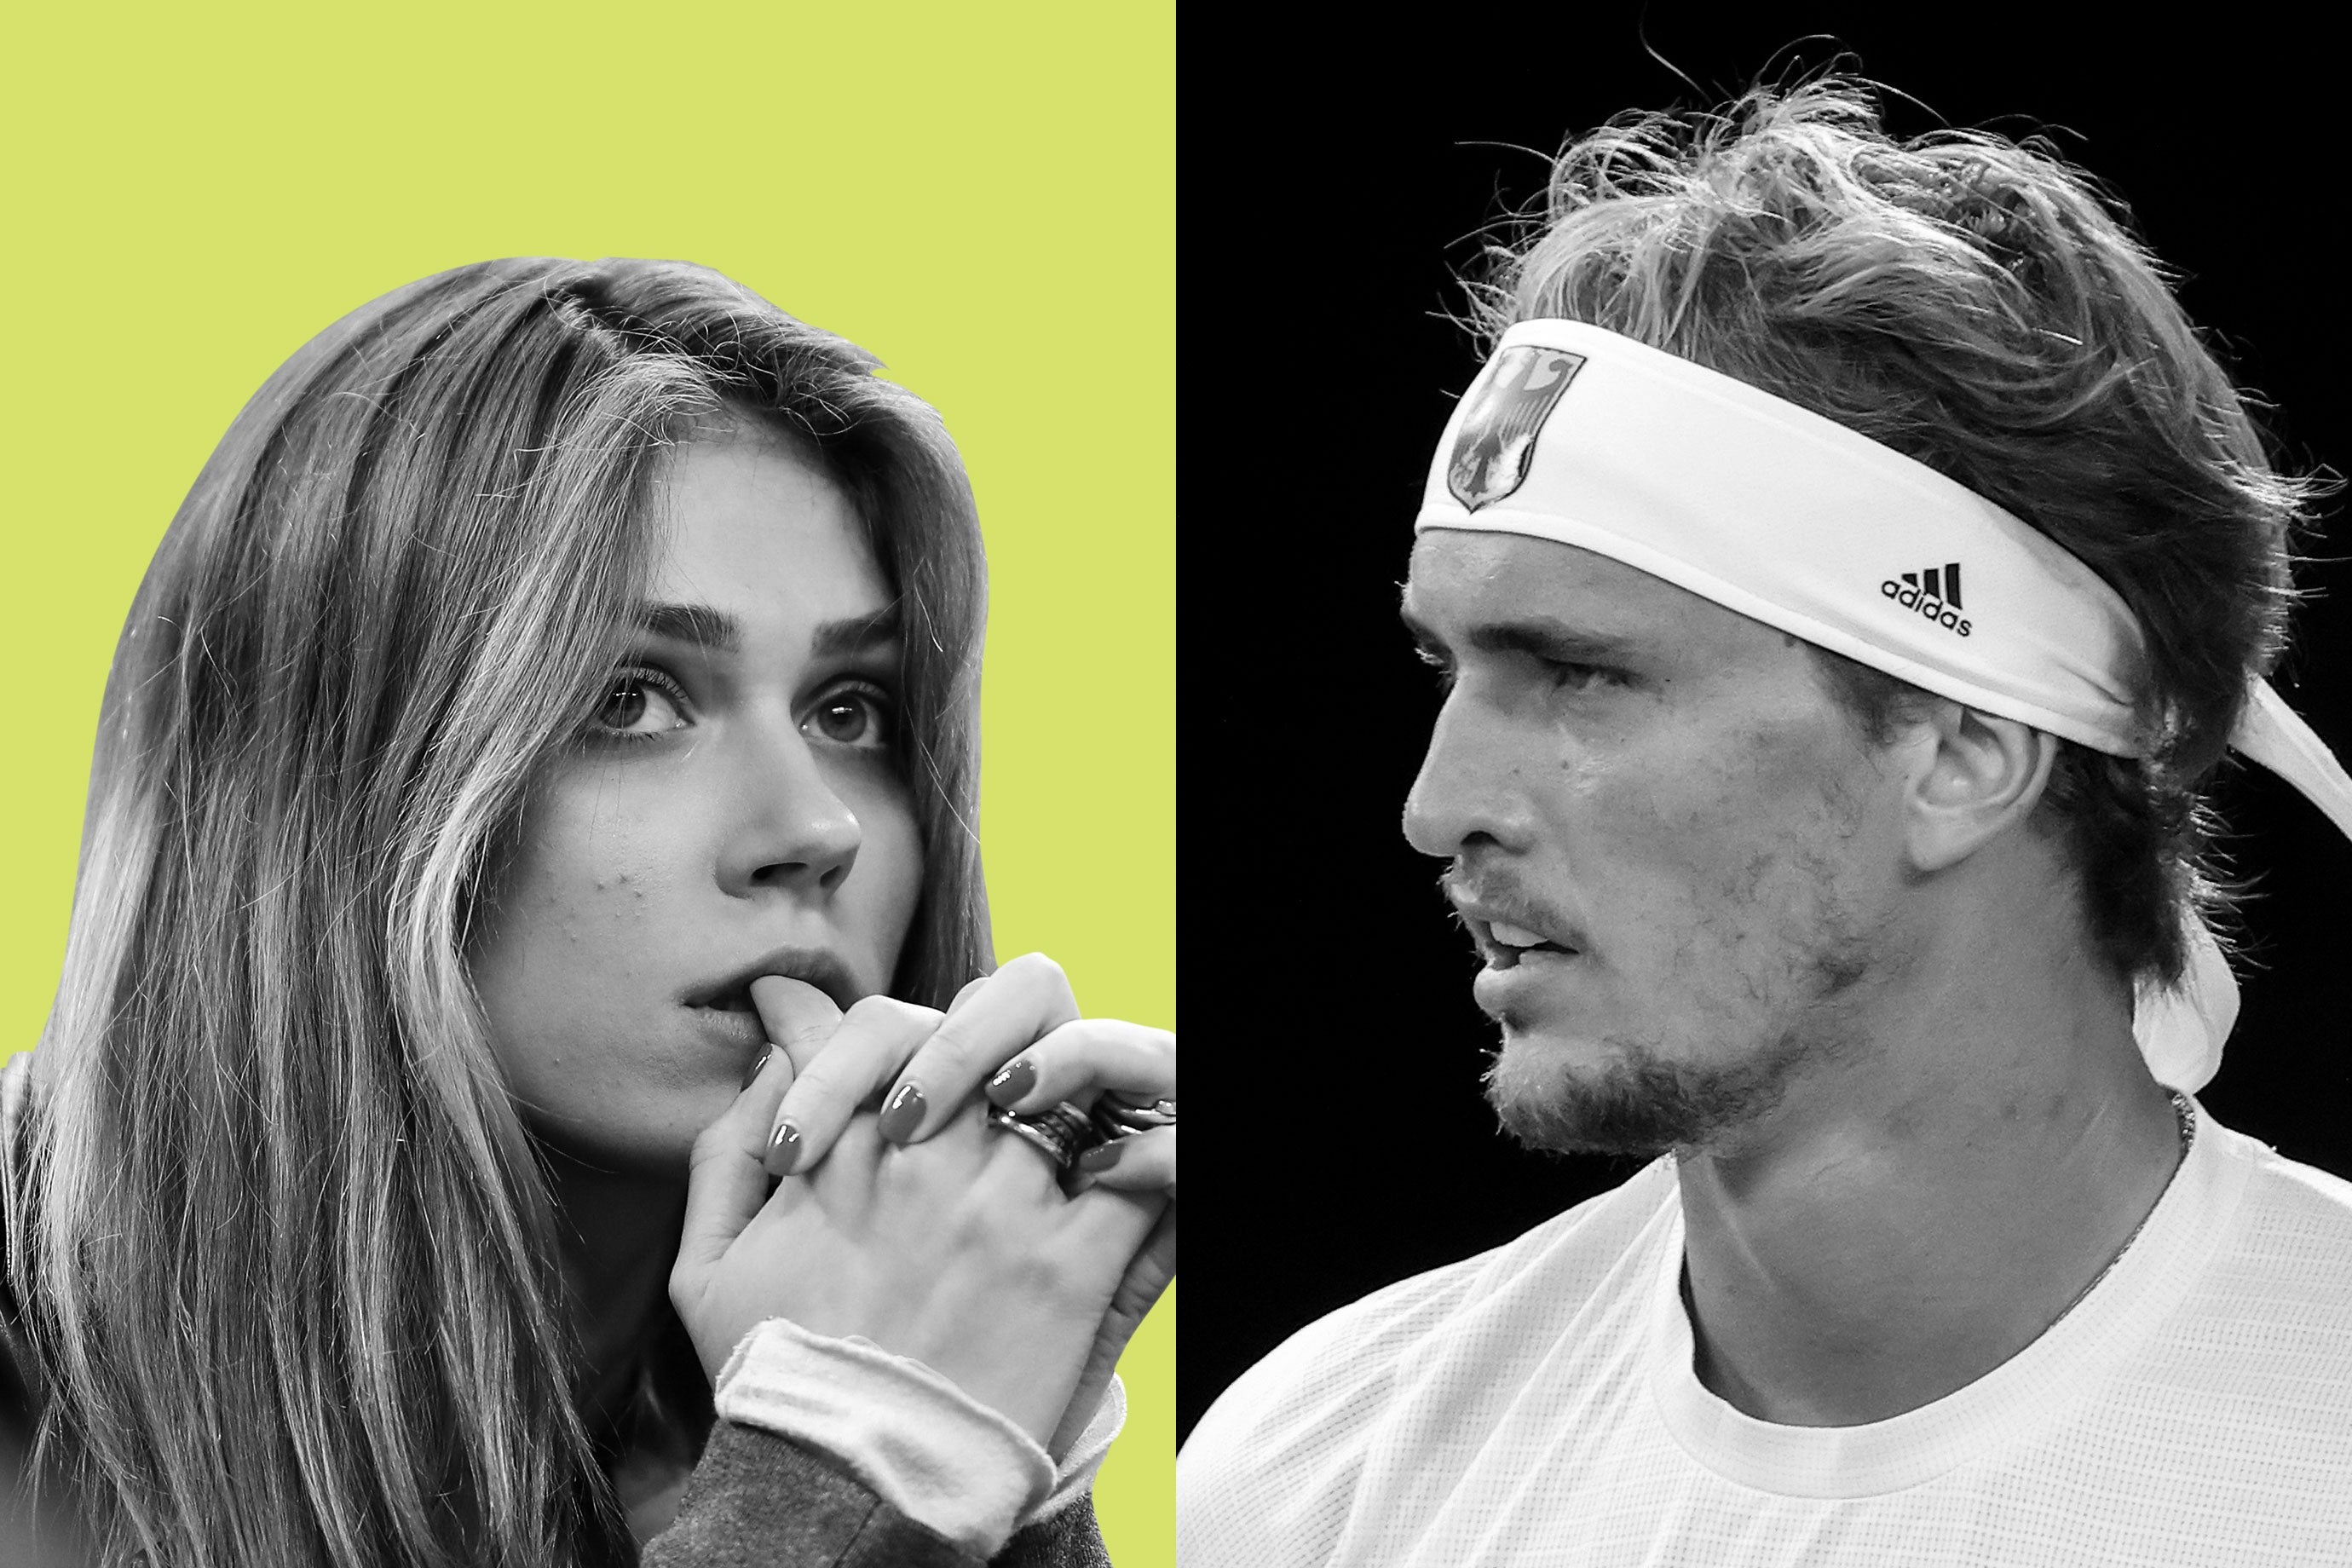 Alexander Zverev Domestic abuse allegations by Olga Sharypova. picture pic